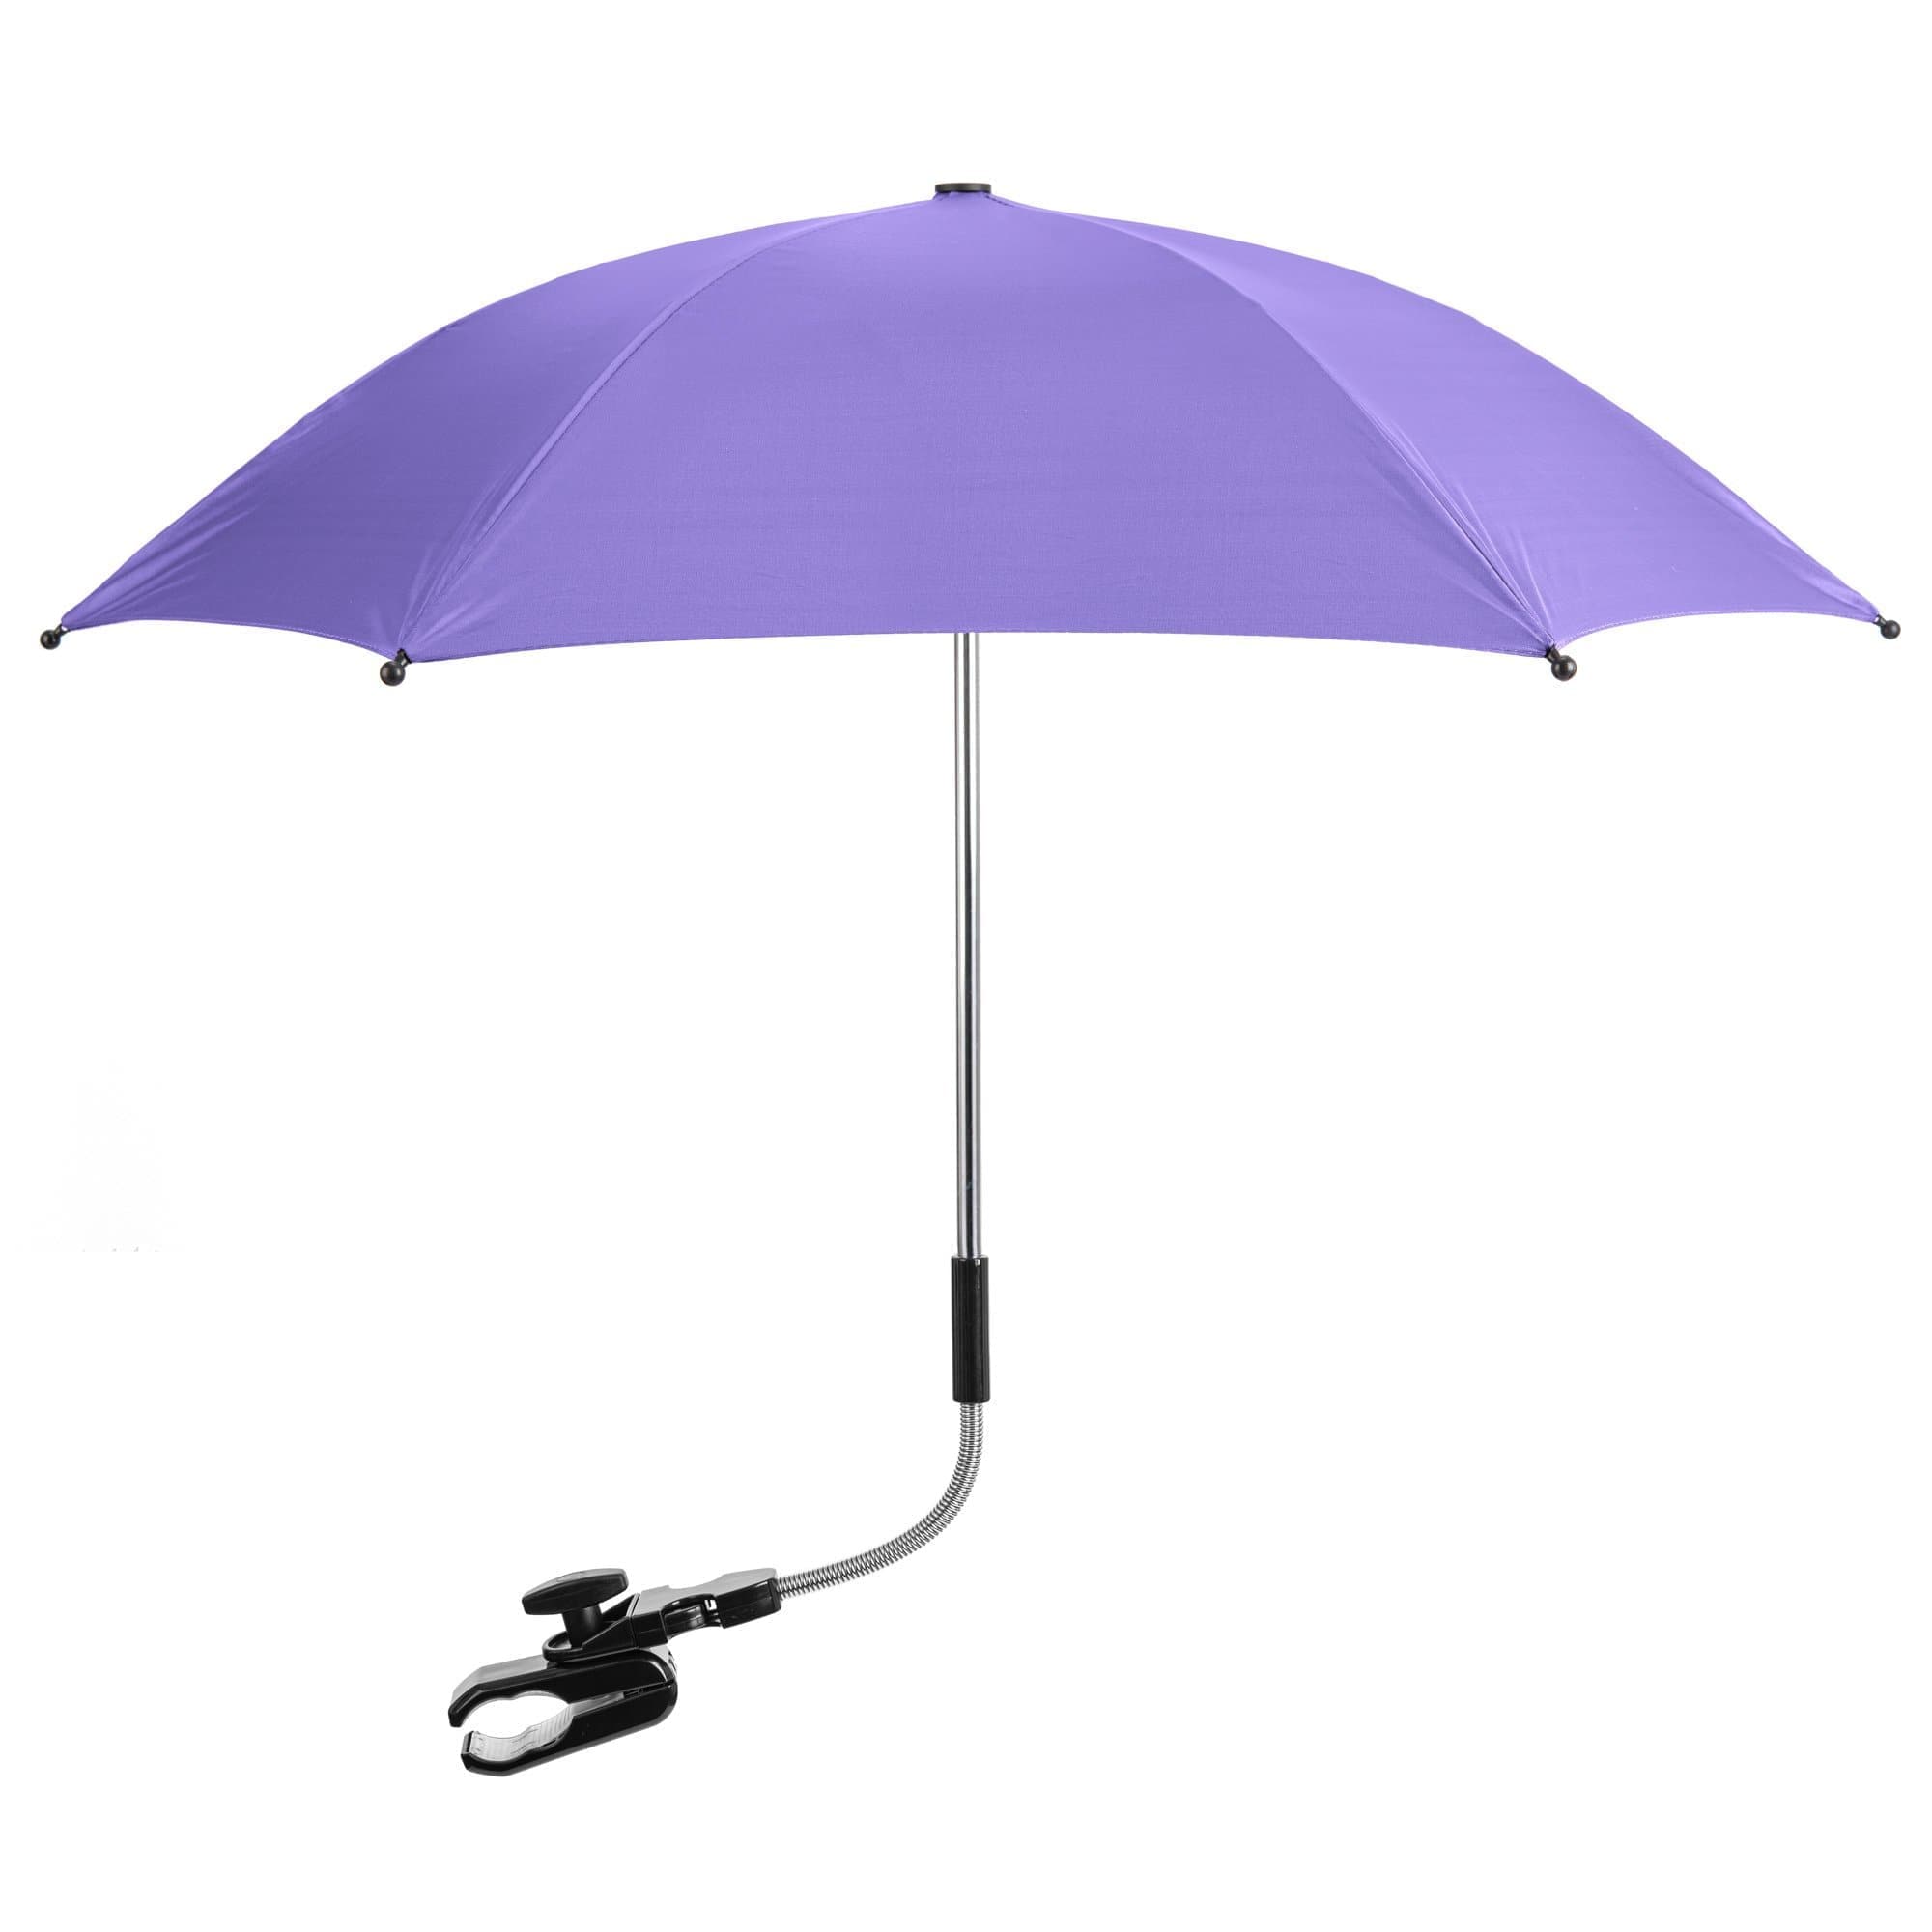 Baby Parasol Compatible With Doona - Fits All Models - For Your Little One